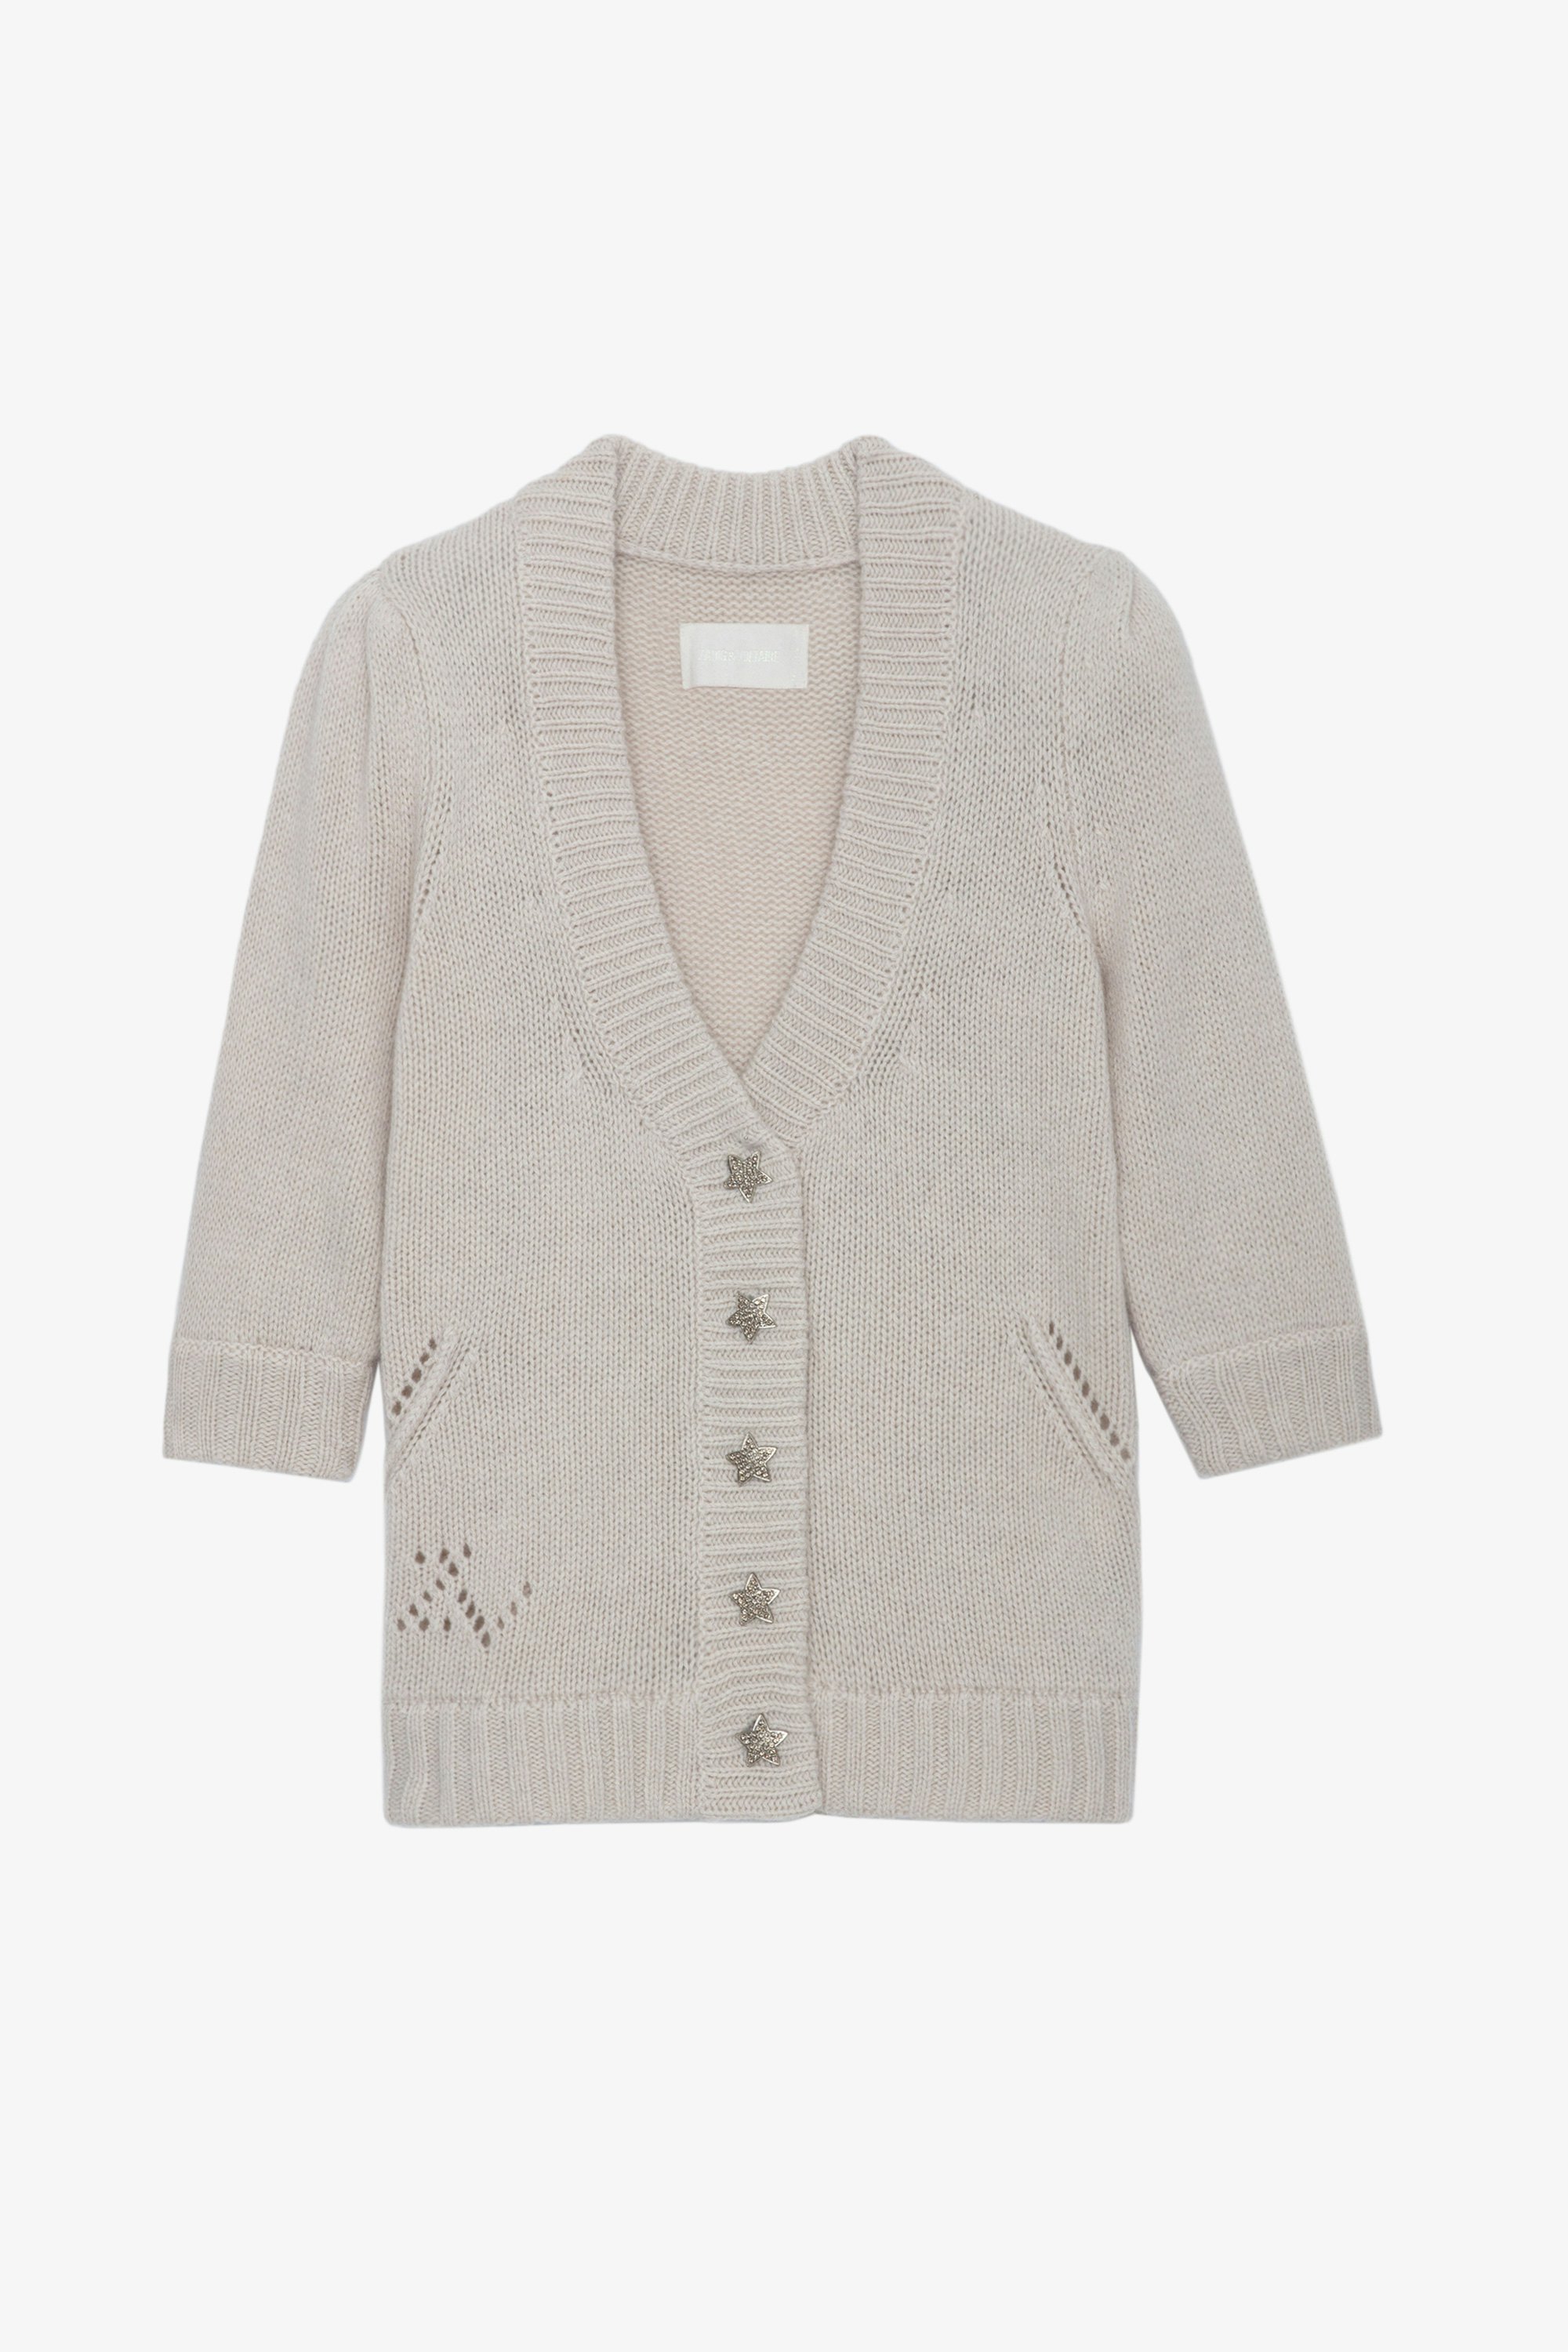 Betsy Cardigan - Ecru knit cardigan with 3/4-length sleeves, gathered shoulders and button fastening with star jewels.